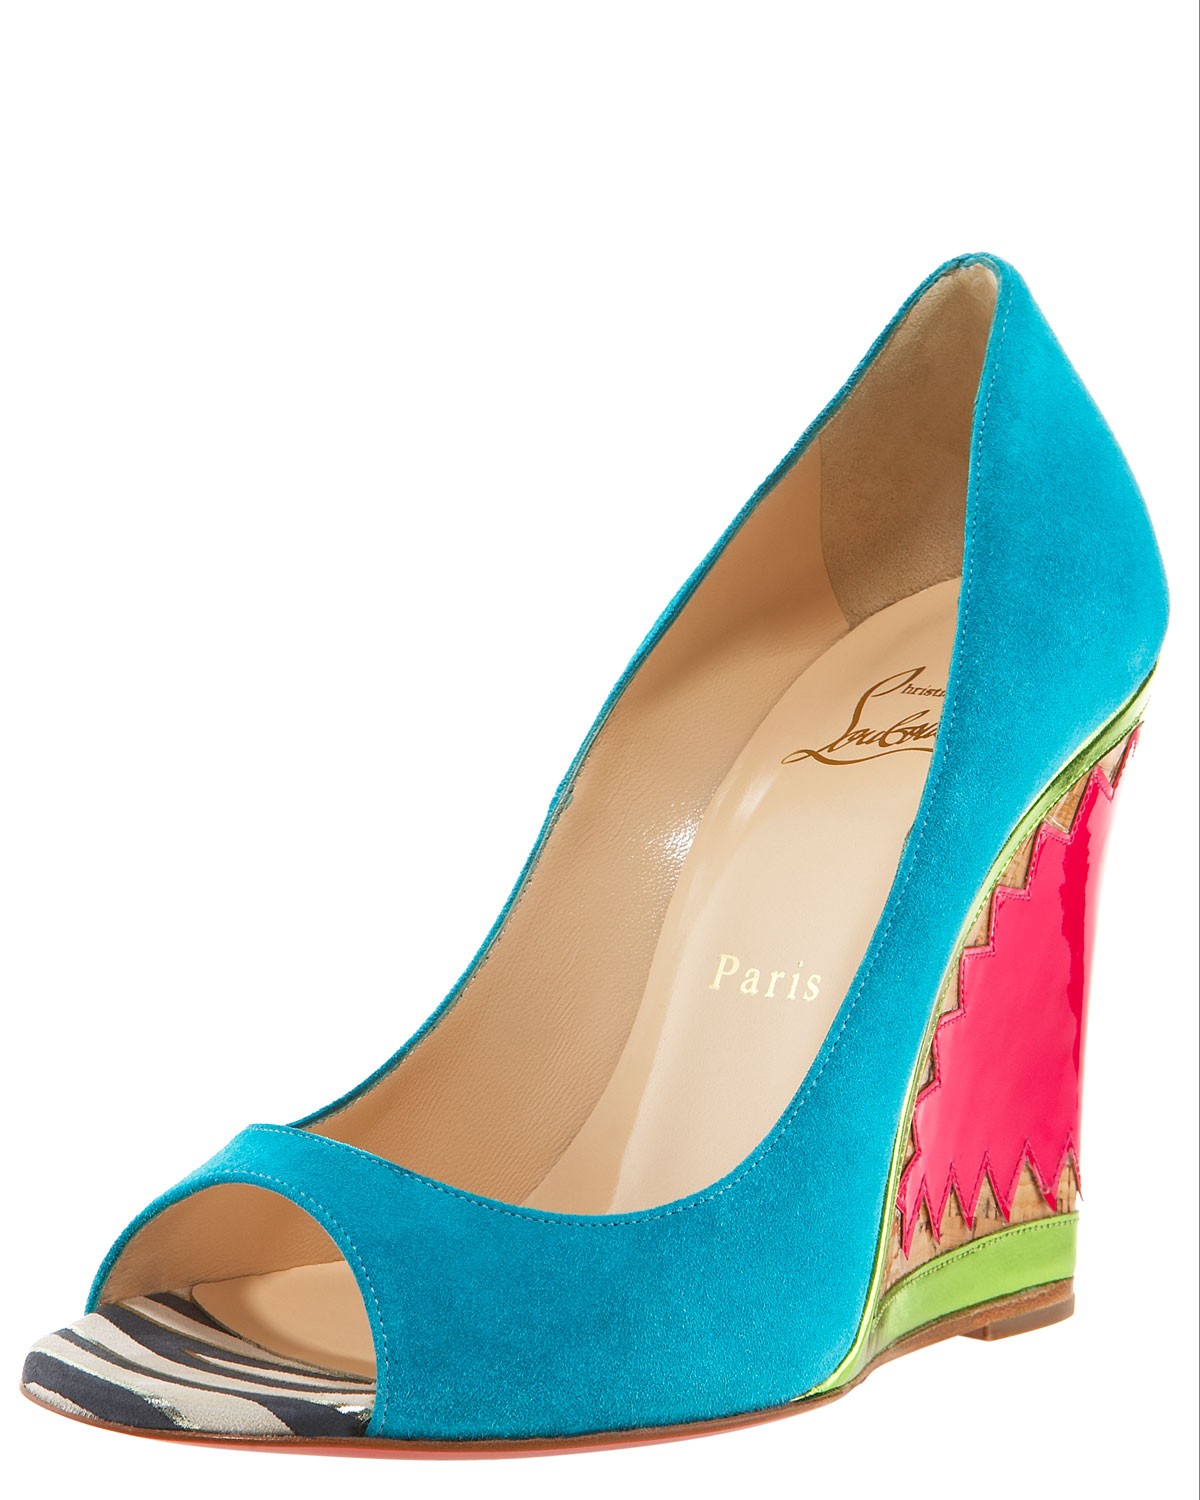 Christian louboutin Miramar Suede & Patent Wedge Pump in Blue | Lyst